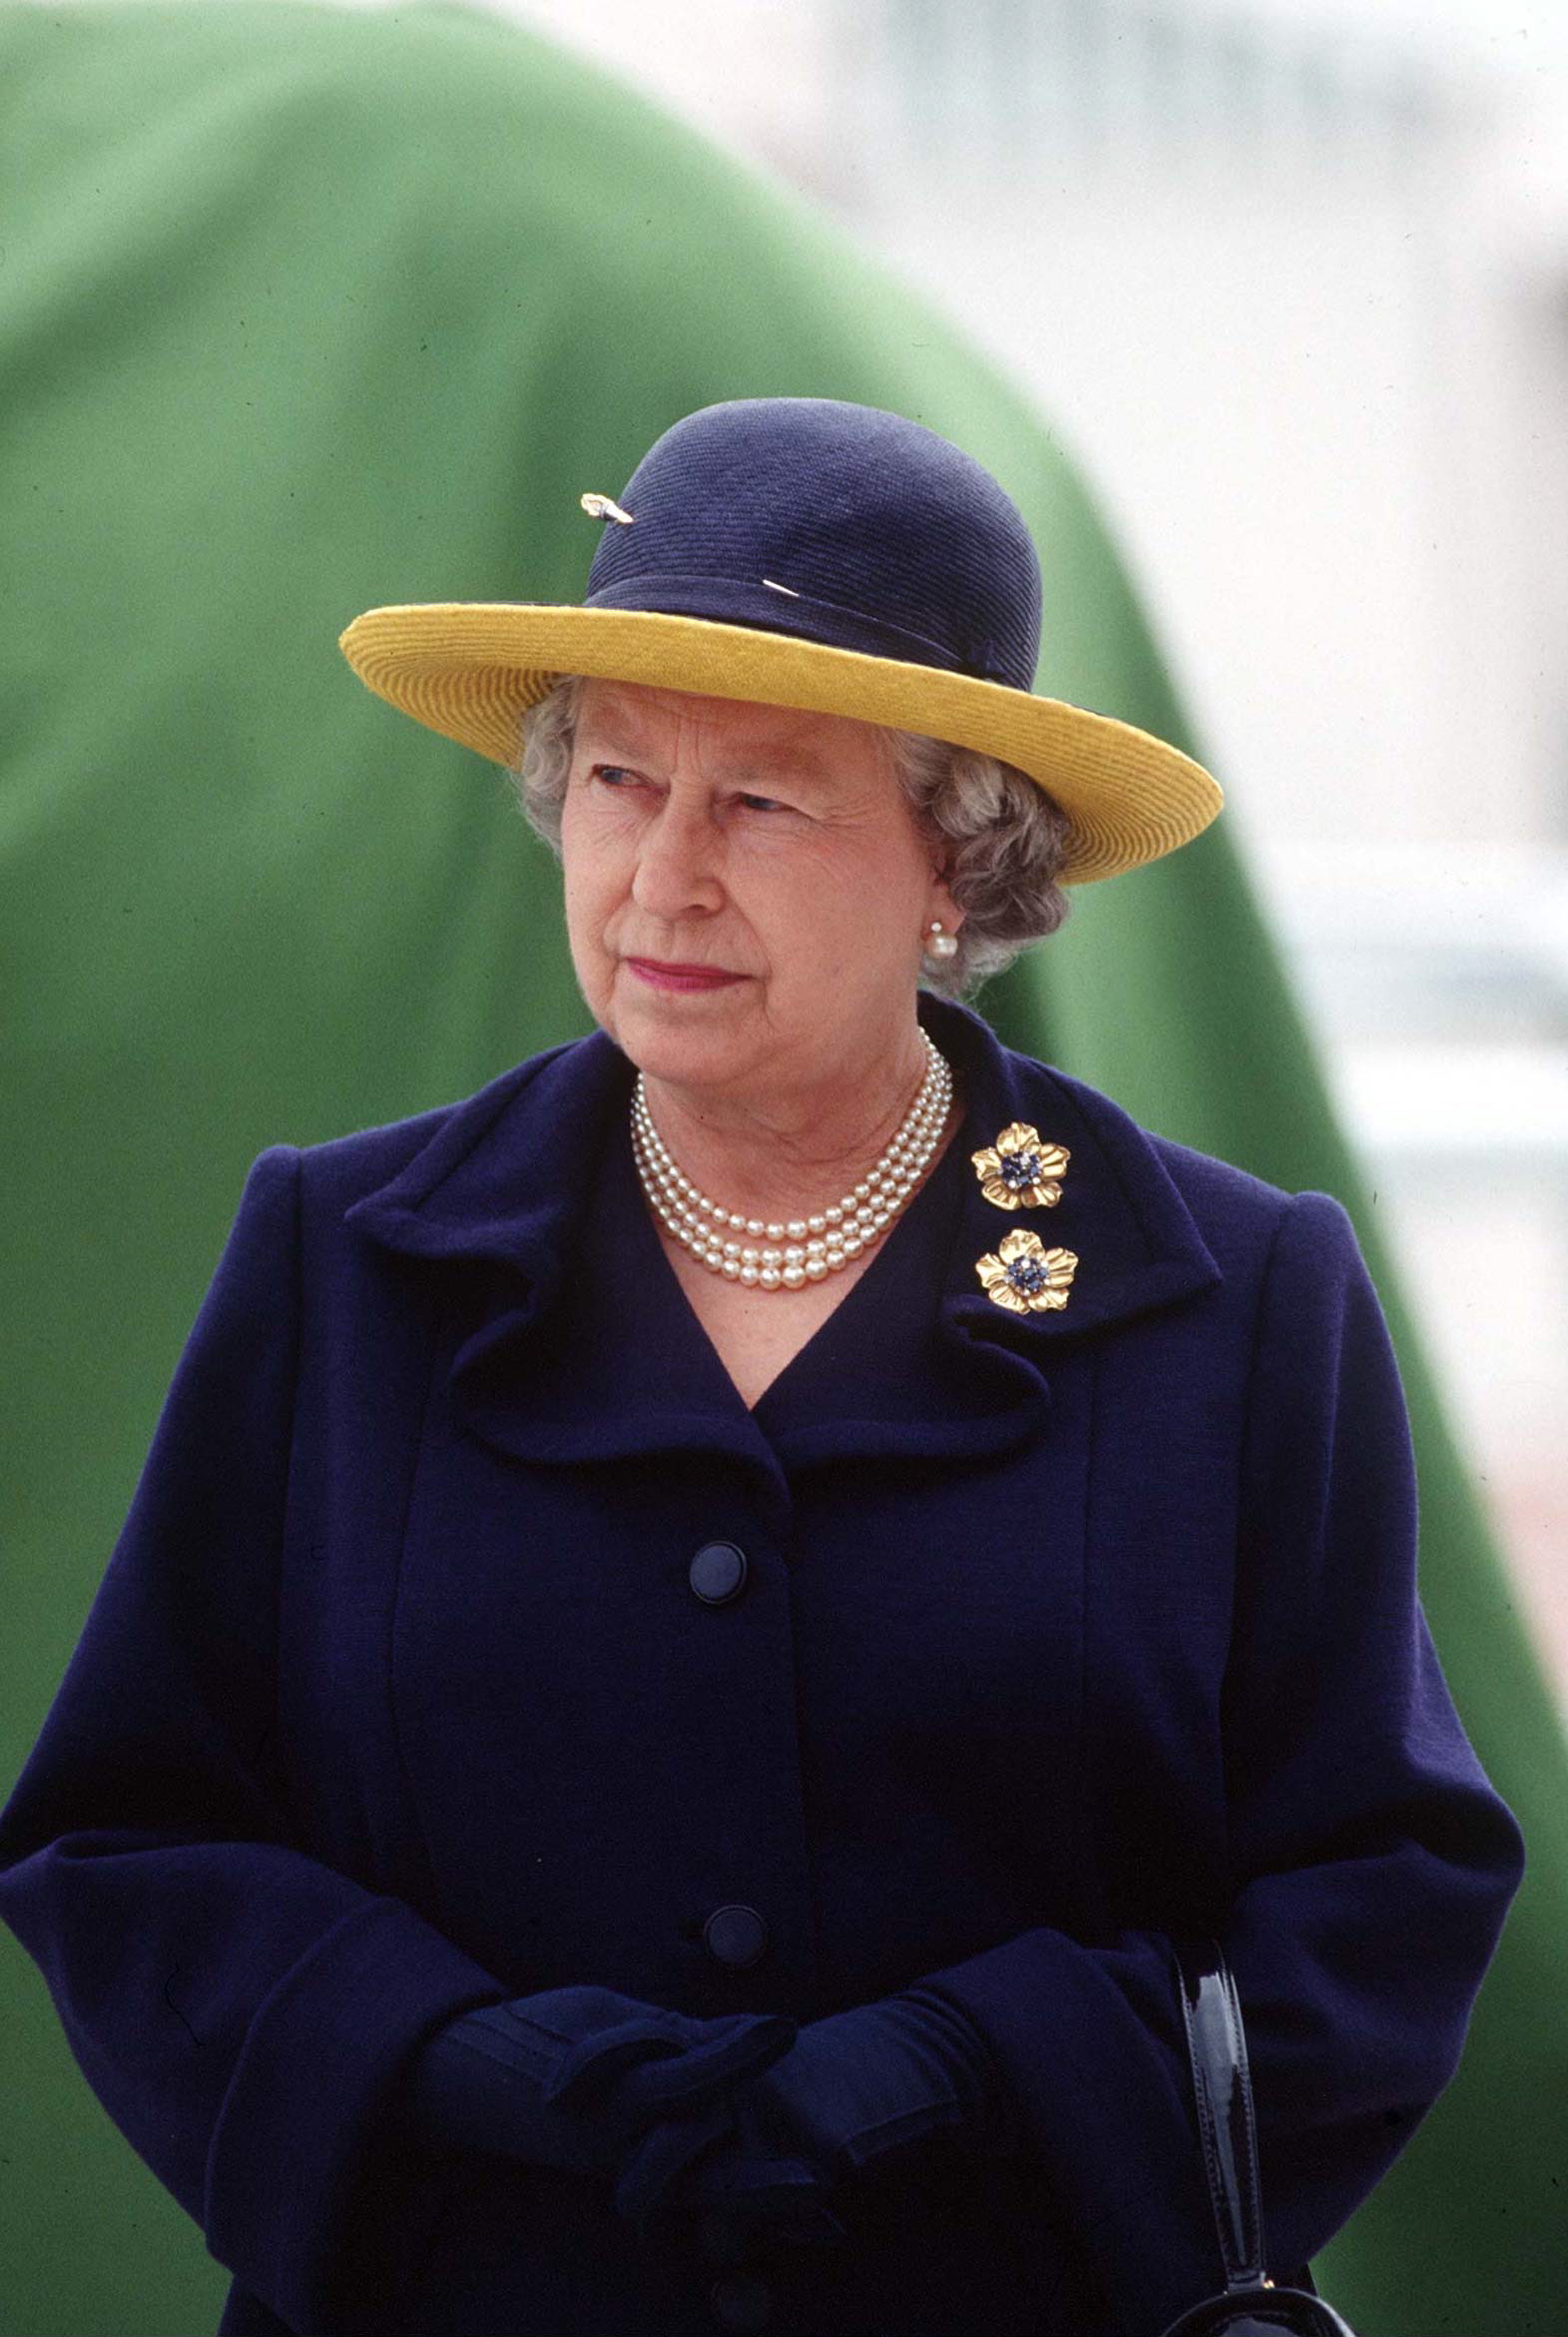 Queen Elizabeth II at The Derby in Epsom, UK on June 10, 1995 | Source: Getty Images